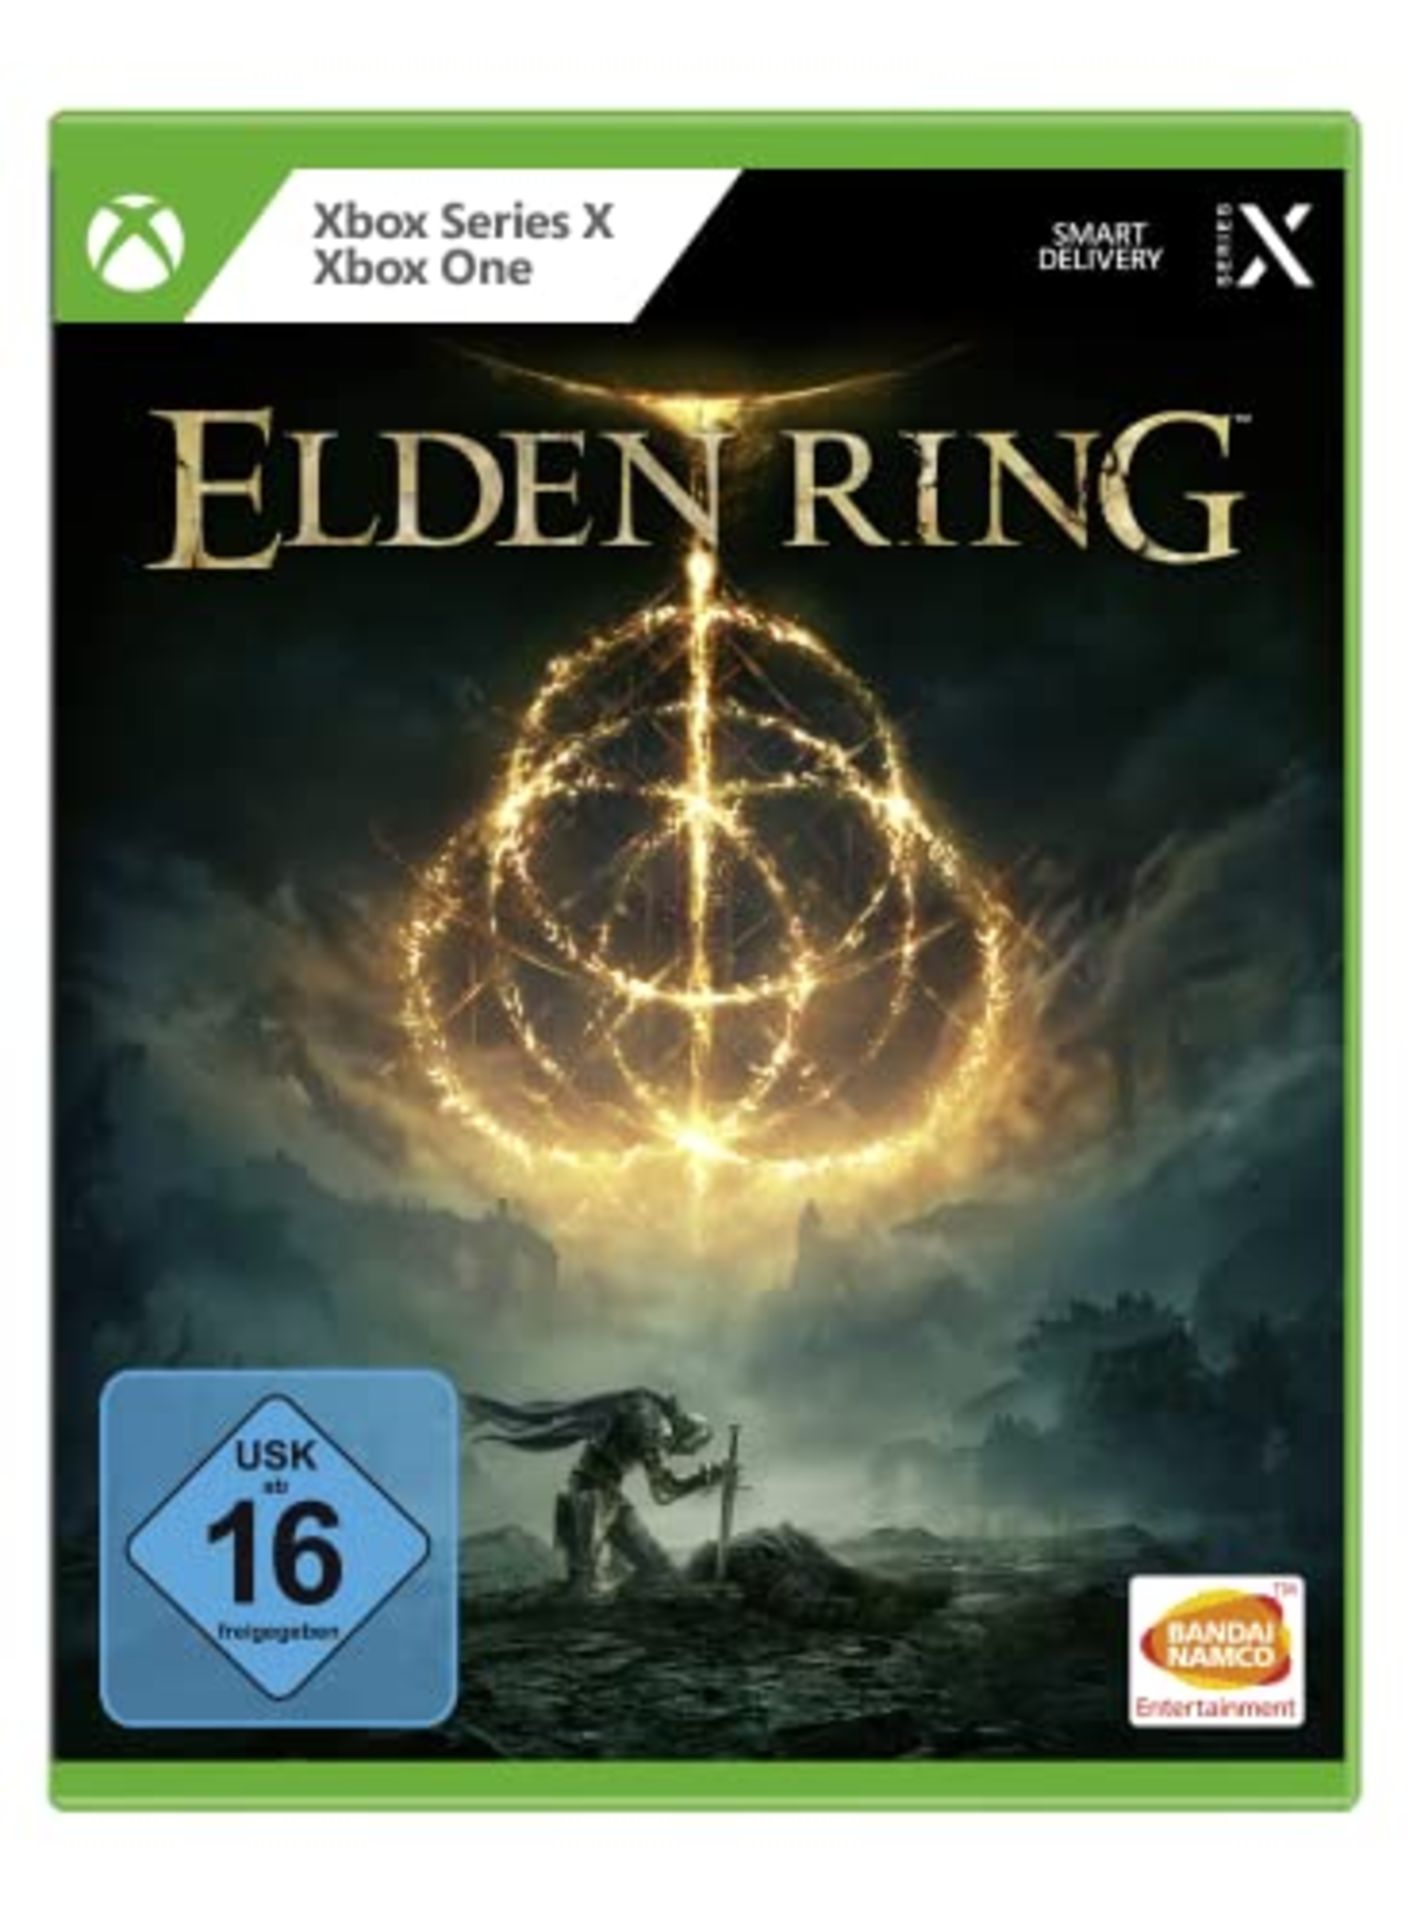 ELDEN RING - Standard Edition [Xbox One] | Free upgrade to Xbox Series X - Image 4 of 6